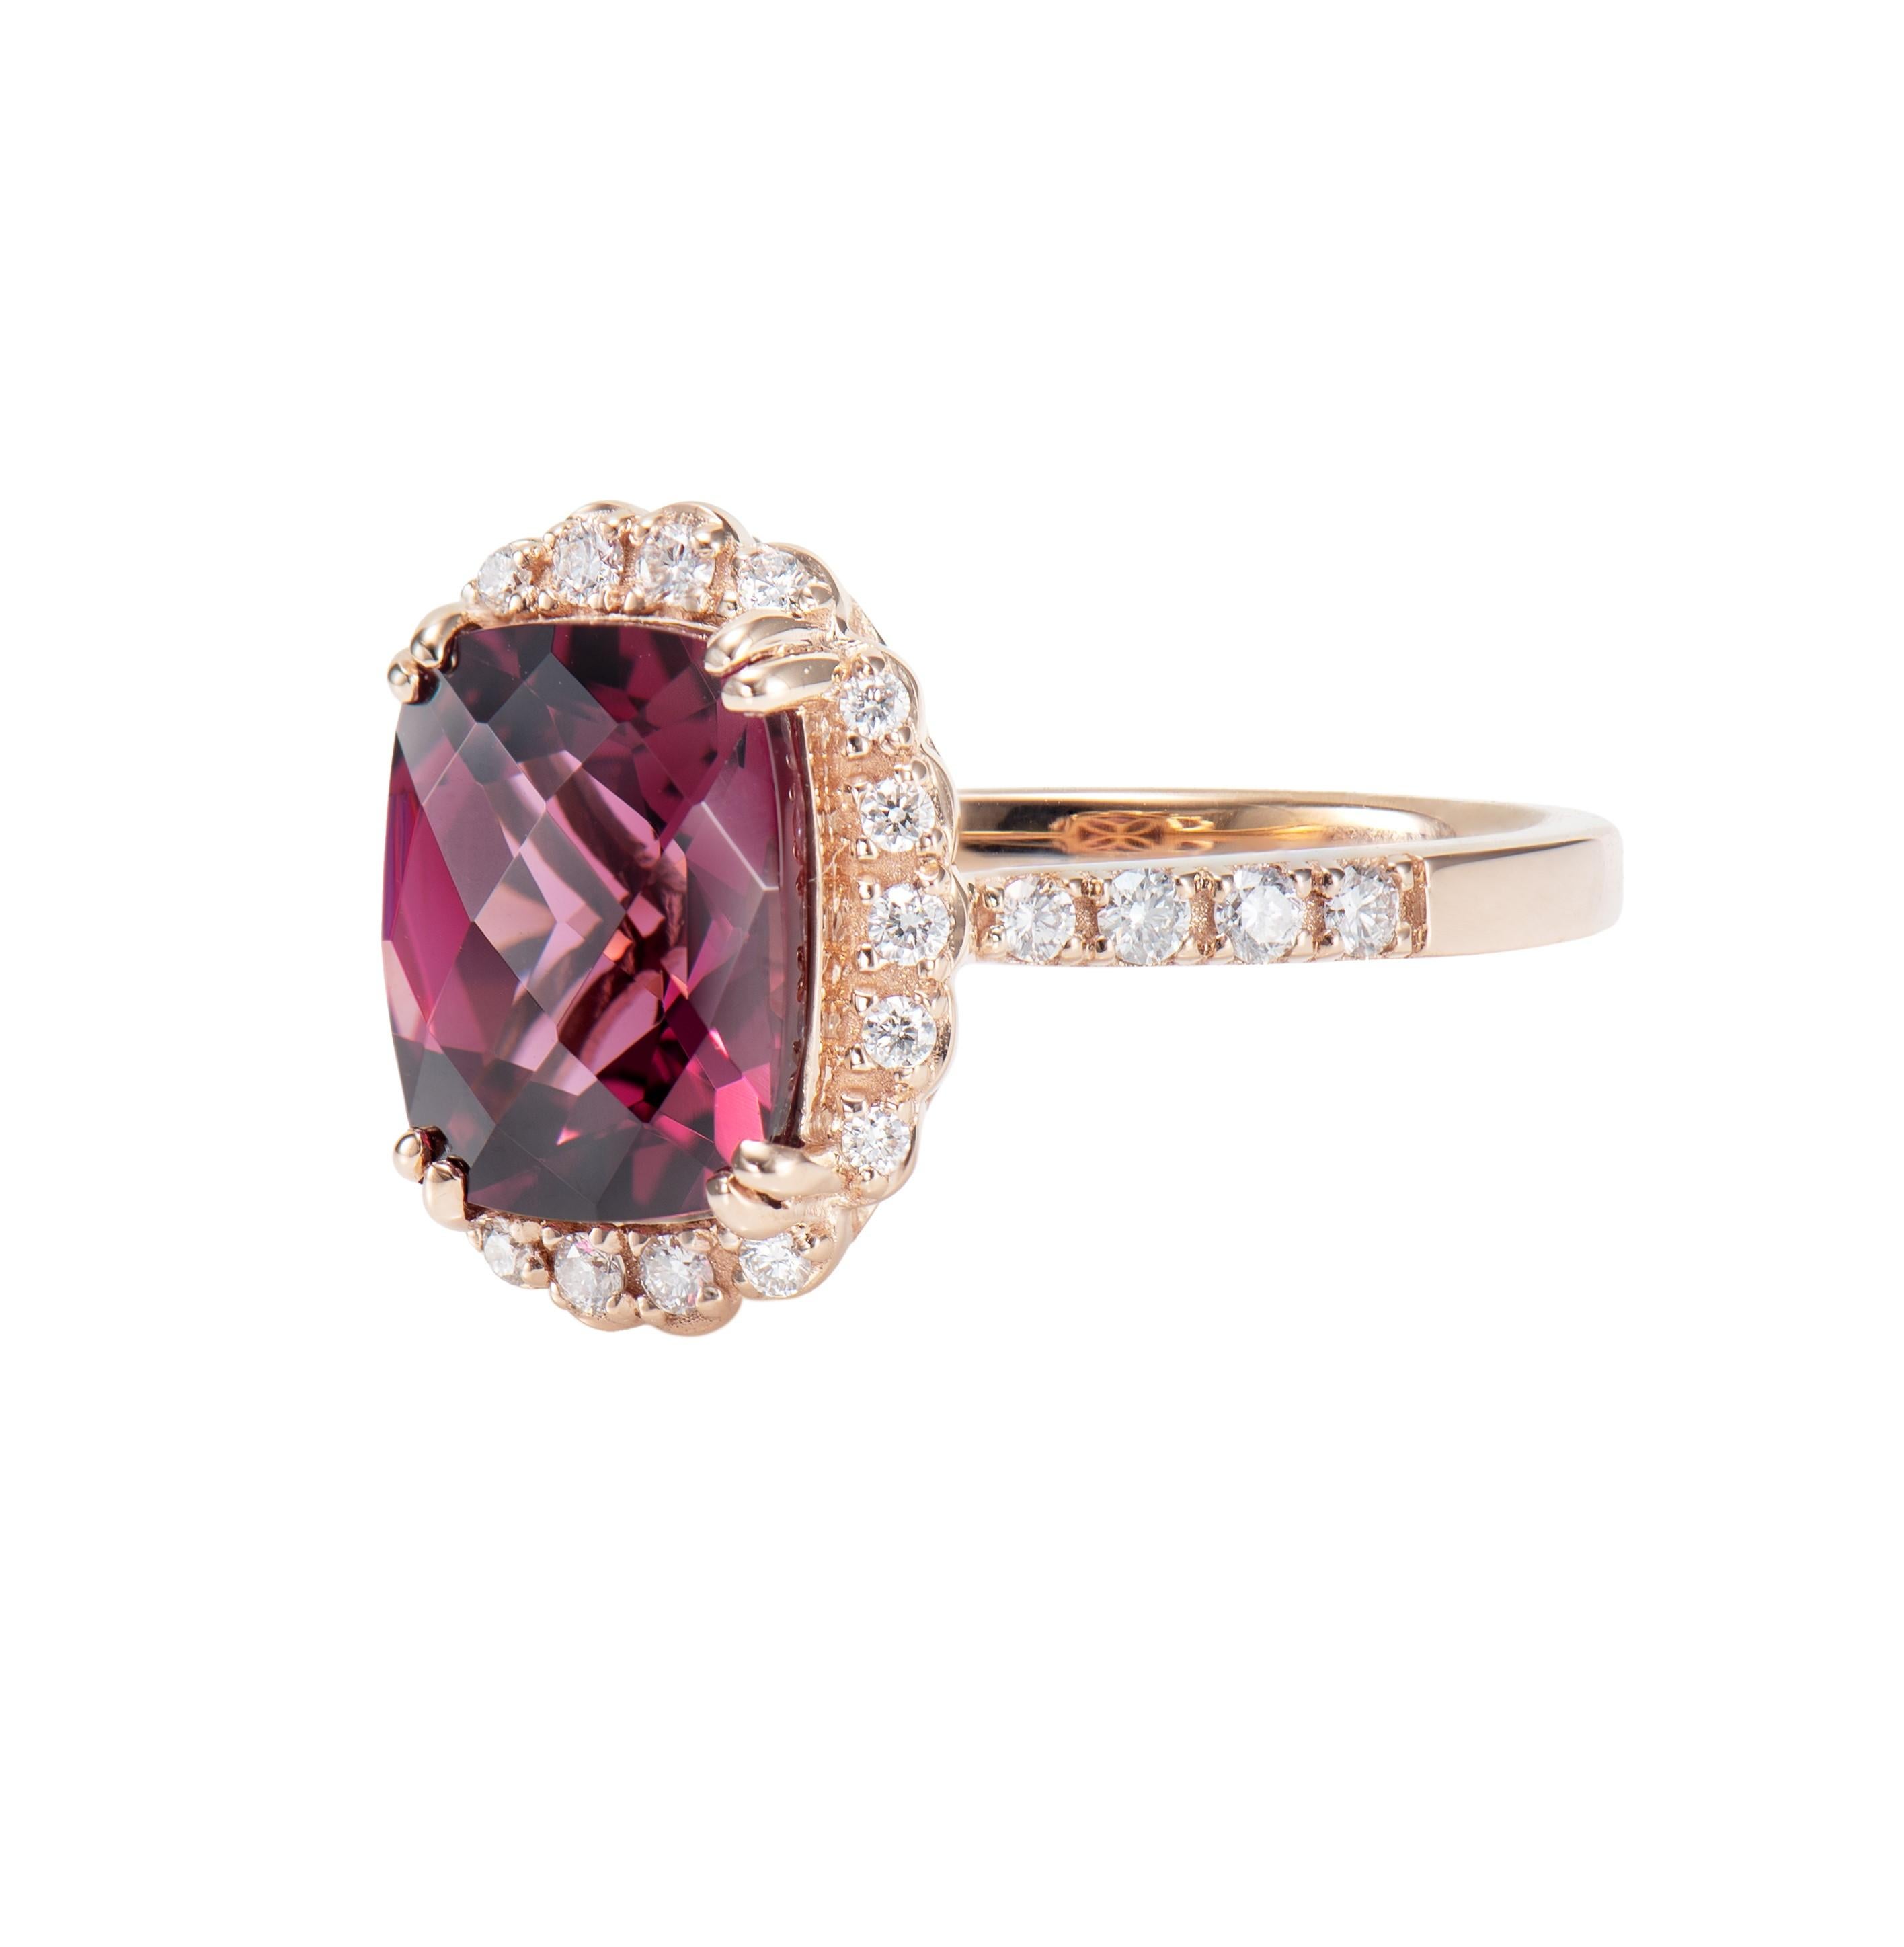 Pear Cut 3.75 Carat Rhodolite Cocktail Ring in 18 Karat Rose Gold with Diamond. For Sale